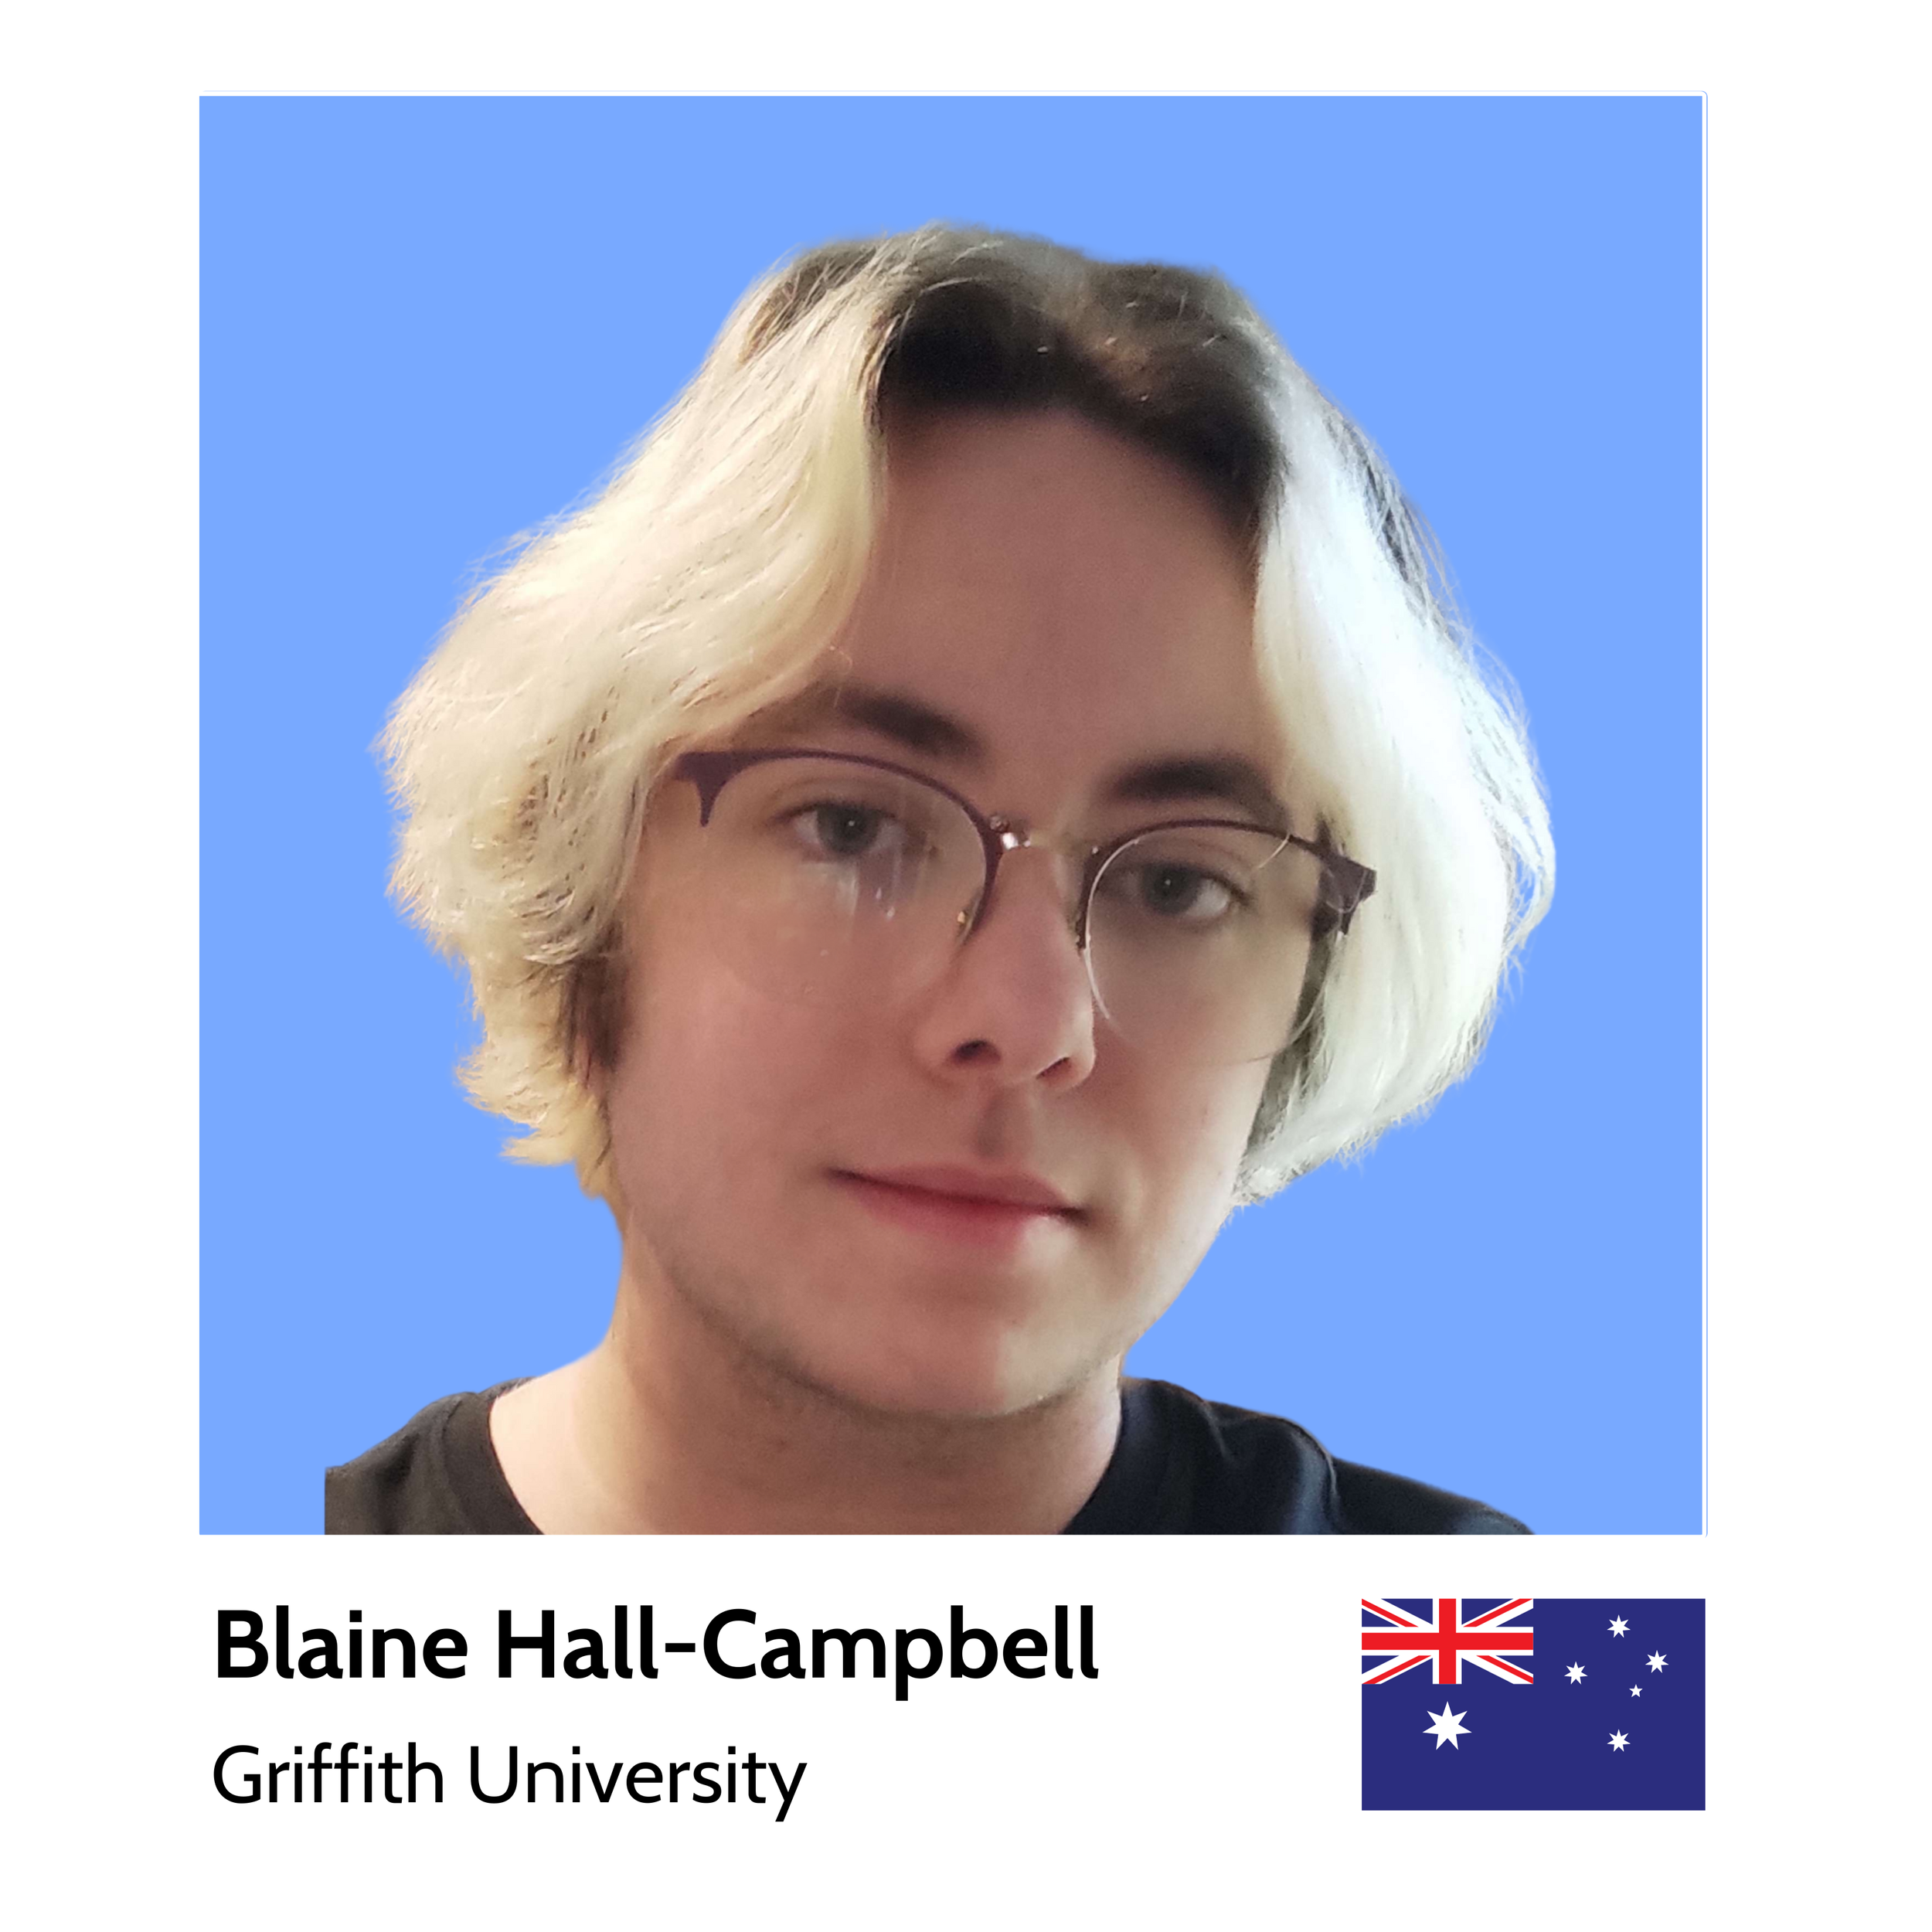 Your_Big_Year_ibm_z_student_ambassador_Blaine Hall-Campbell_Griffith University.png